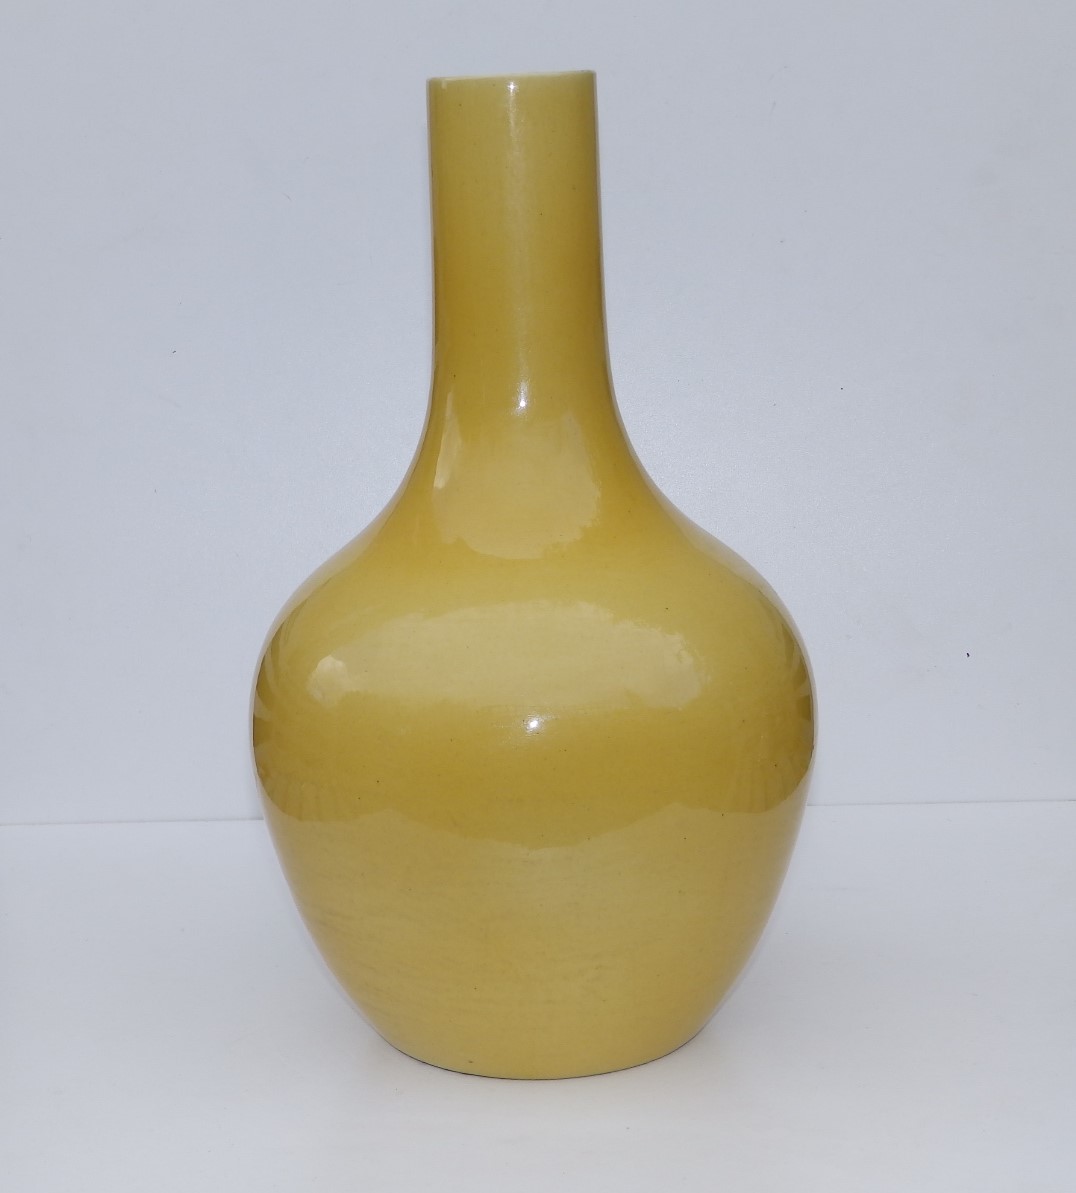 An 18thC Chinese Imperial yellow glazed porcelain bottle vase, 15.5" high - base drilled for use - Image 2 of 12